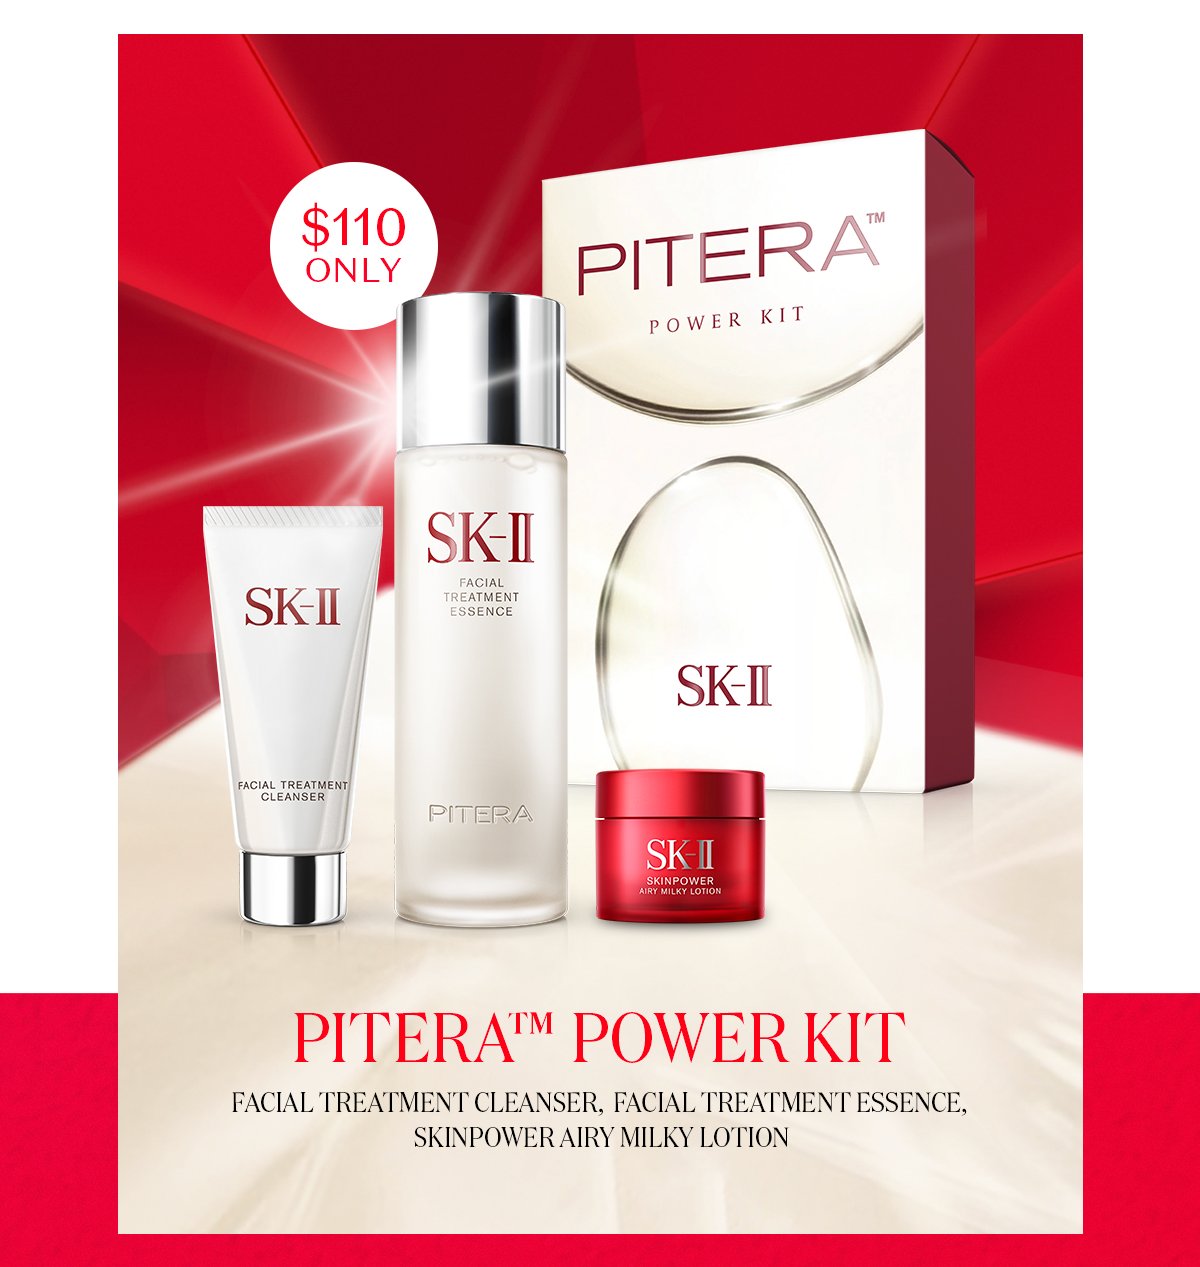 The PITERA™ Power Kit has all you need to supercharge your skin to Crystal Clear.